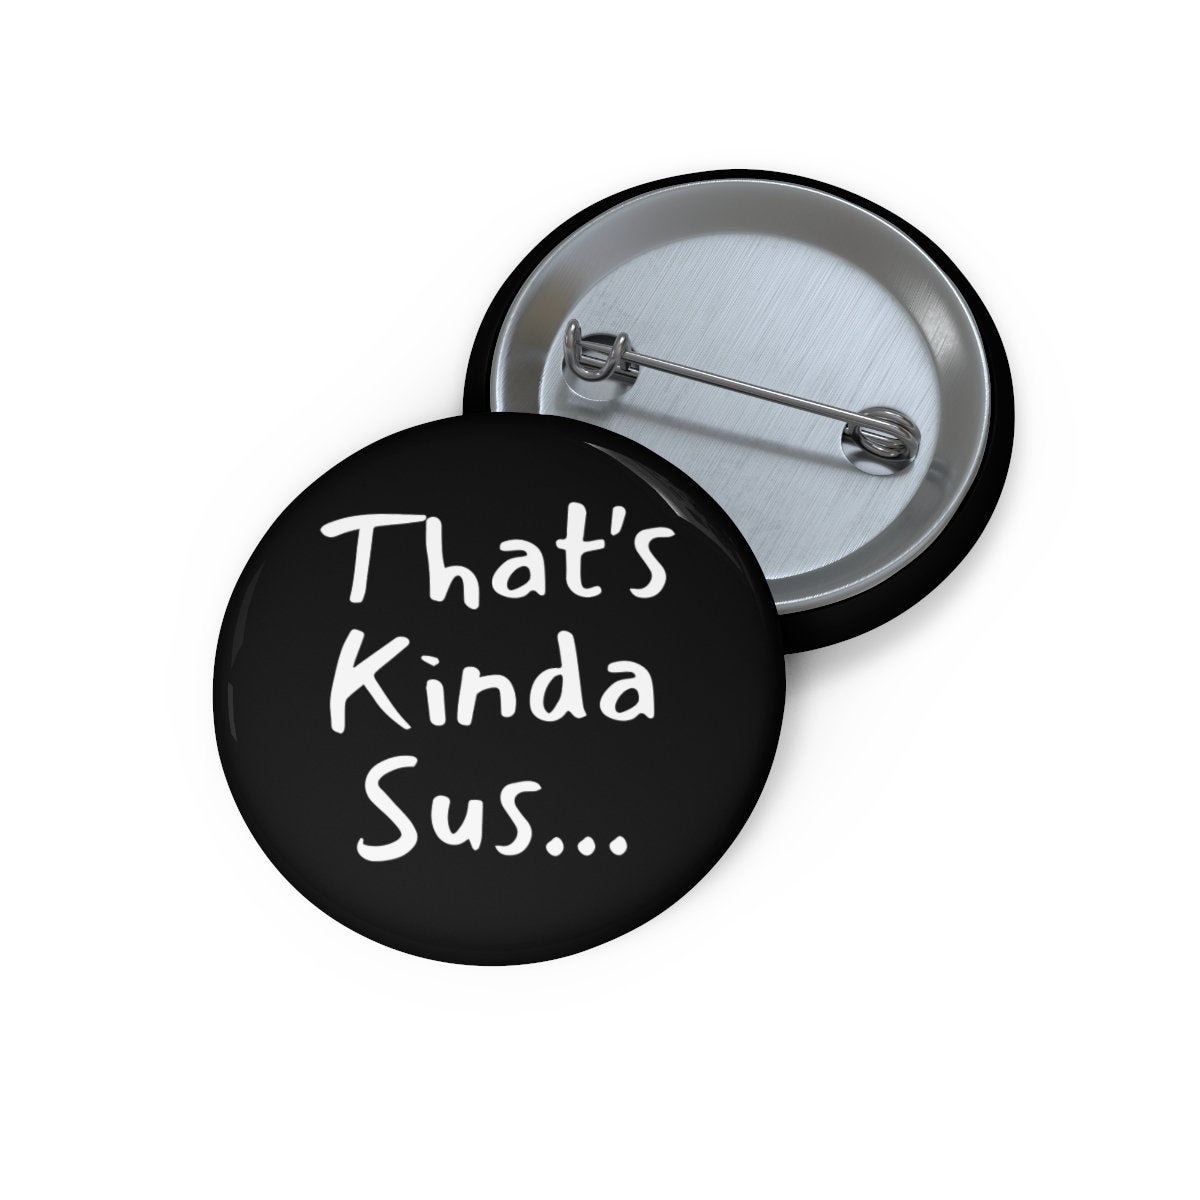 Among Us Meme Pins and Buttons for Sale